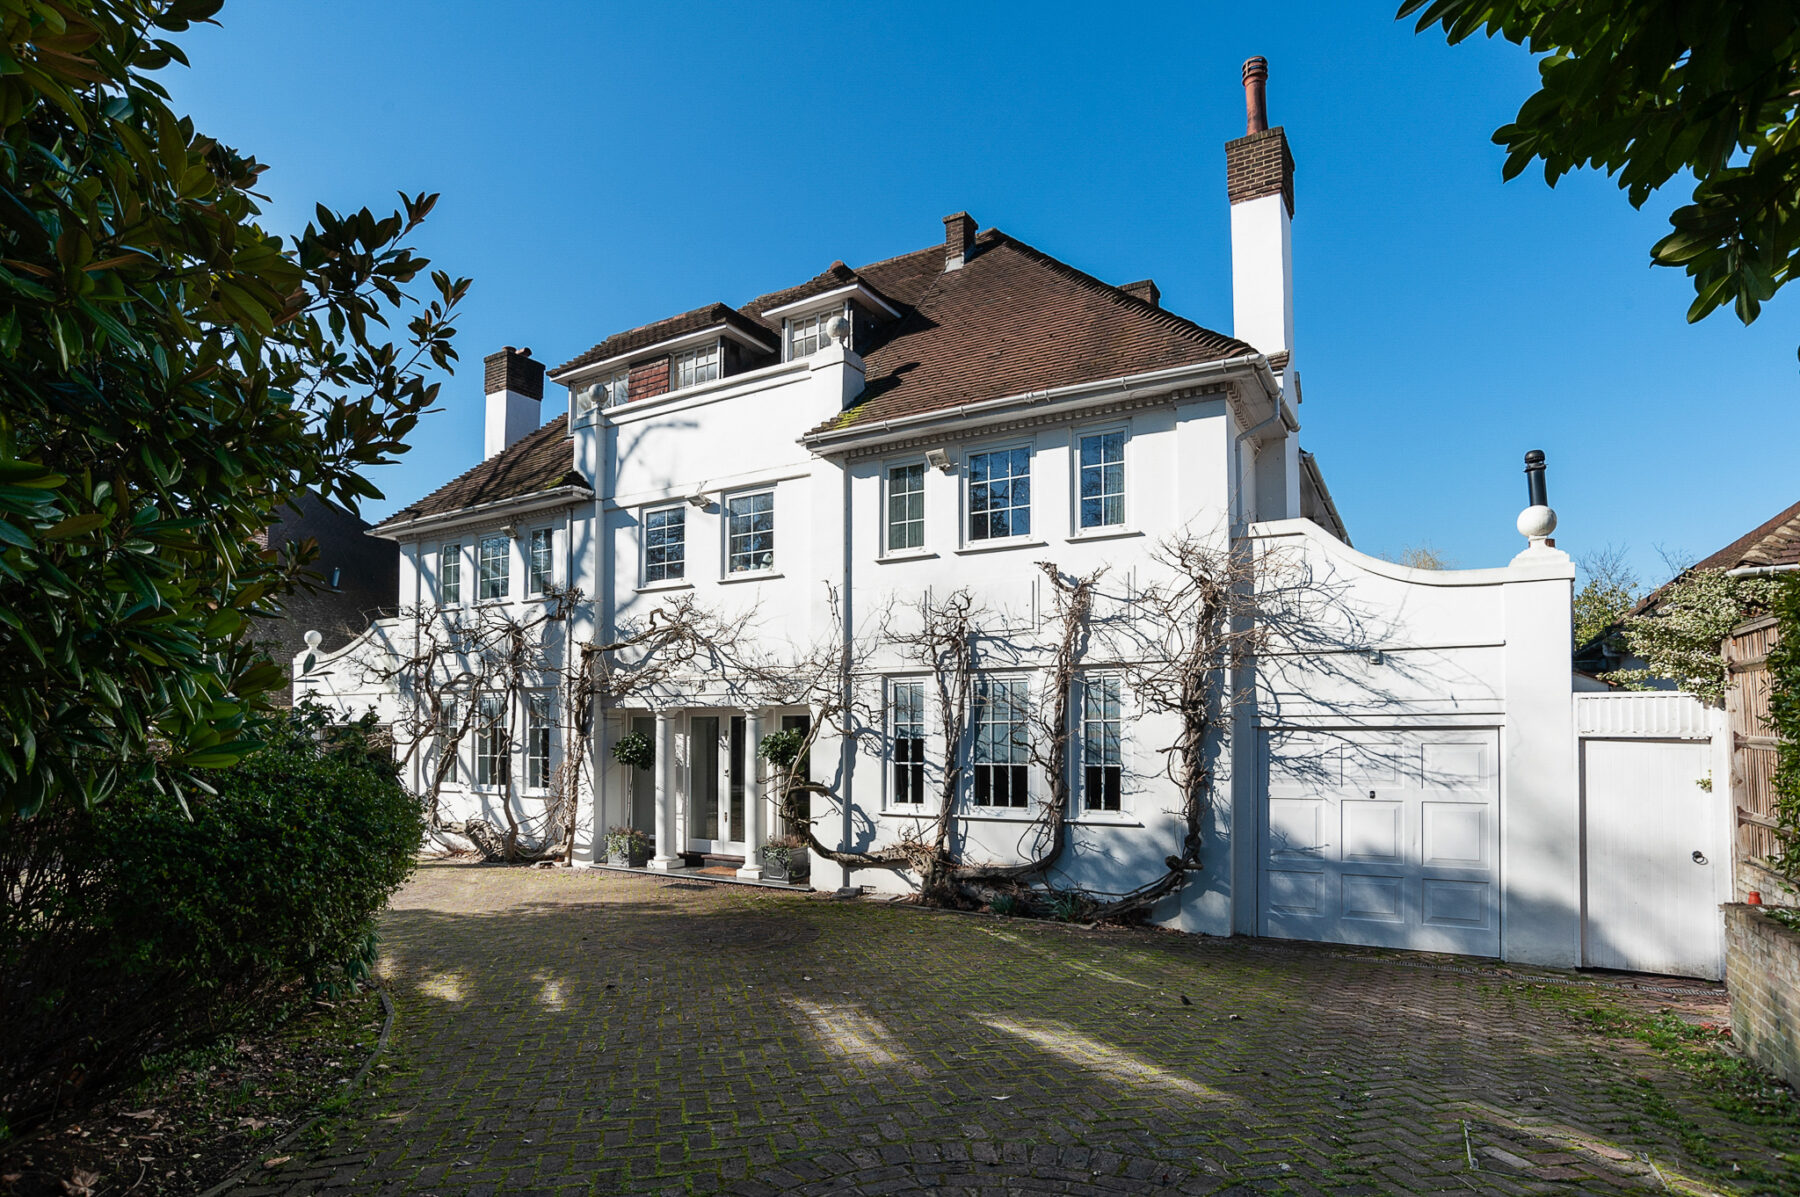 Classic white house 1930s wisteria driveway spring filming location hire lodge London 11